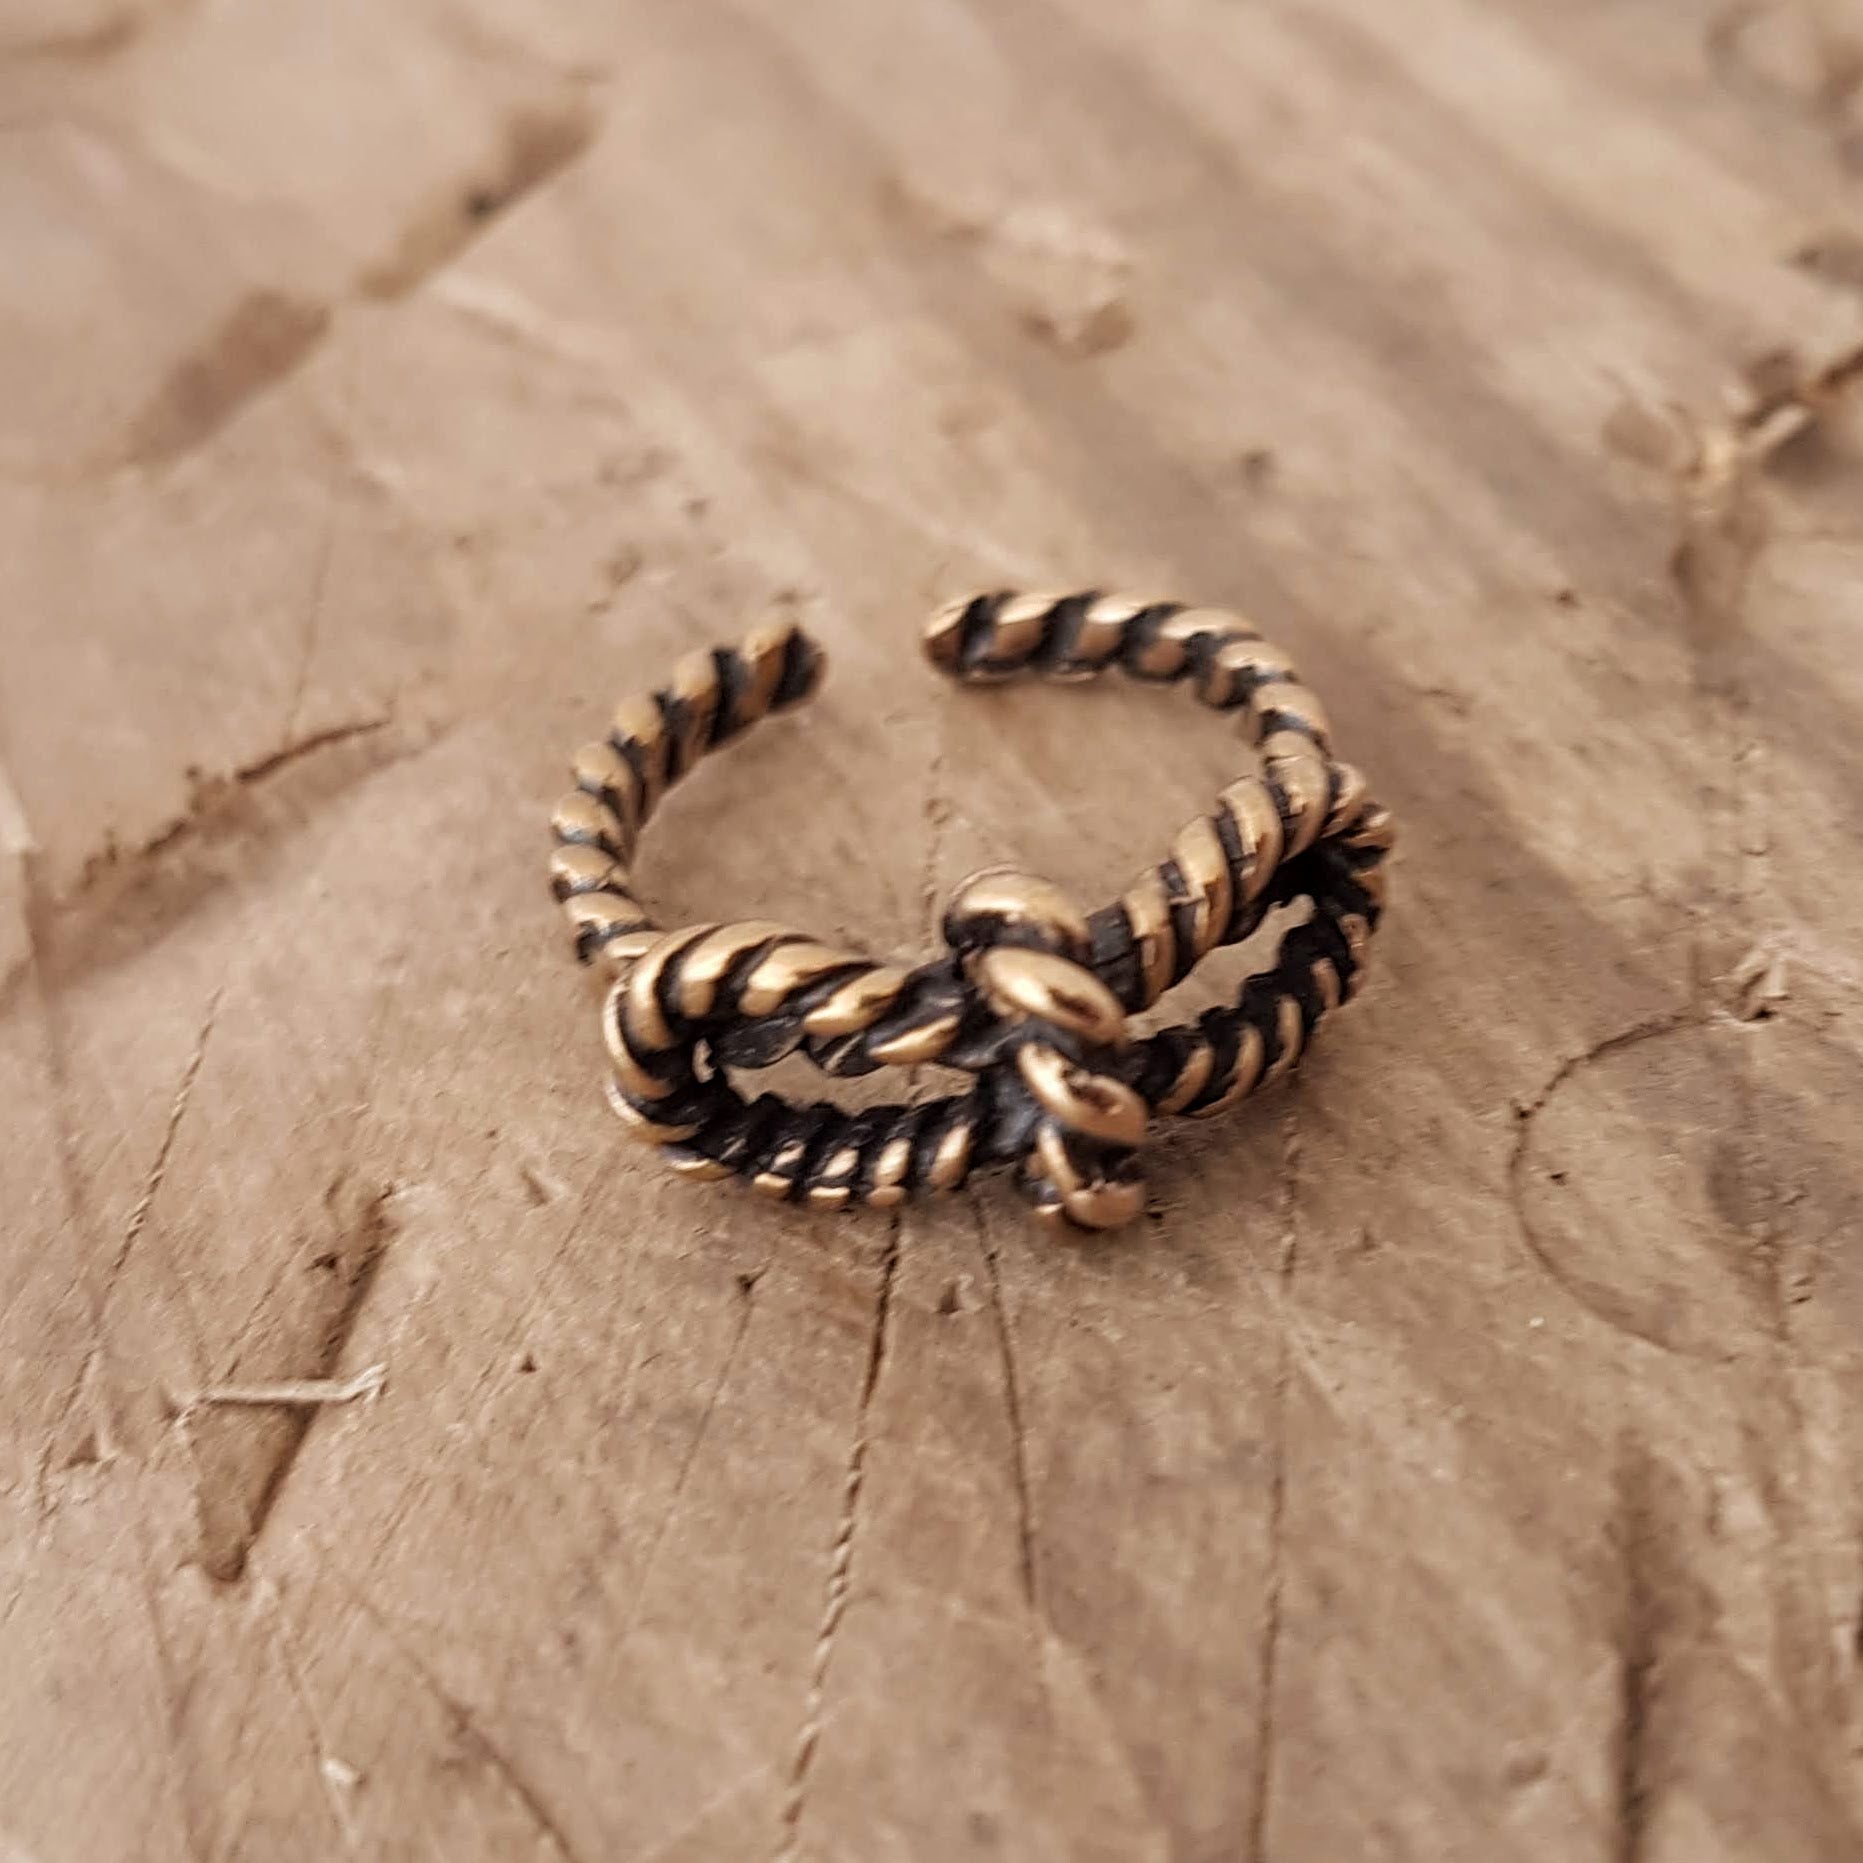 Tiny Bow Rope Ring - Gwen Delicious Jewelry Designs